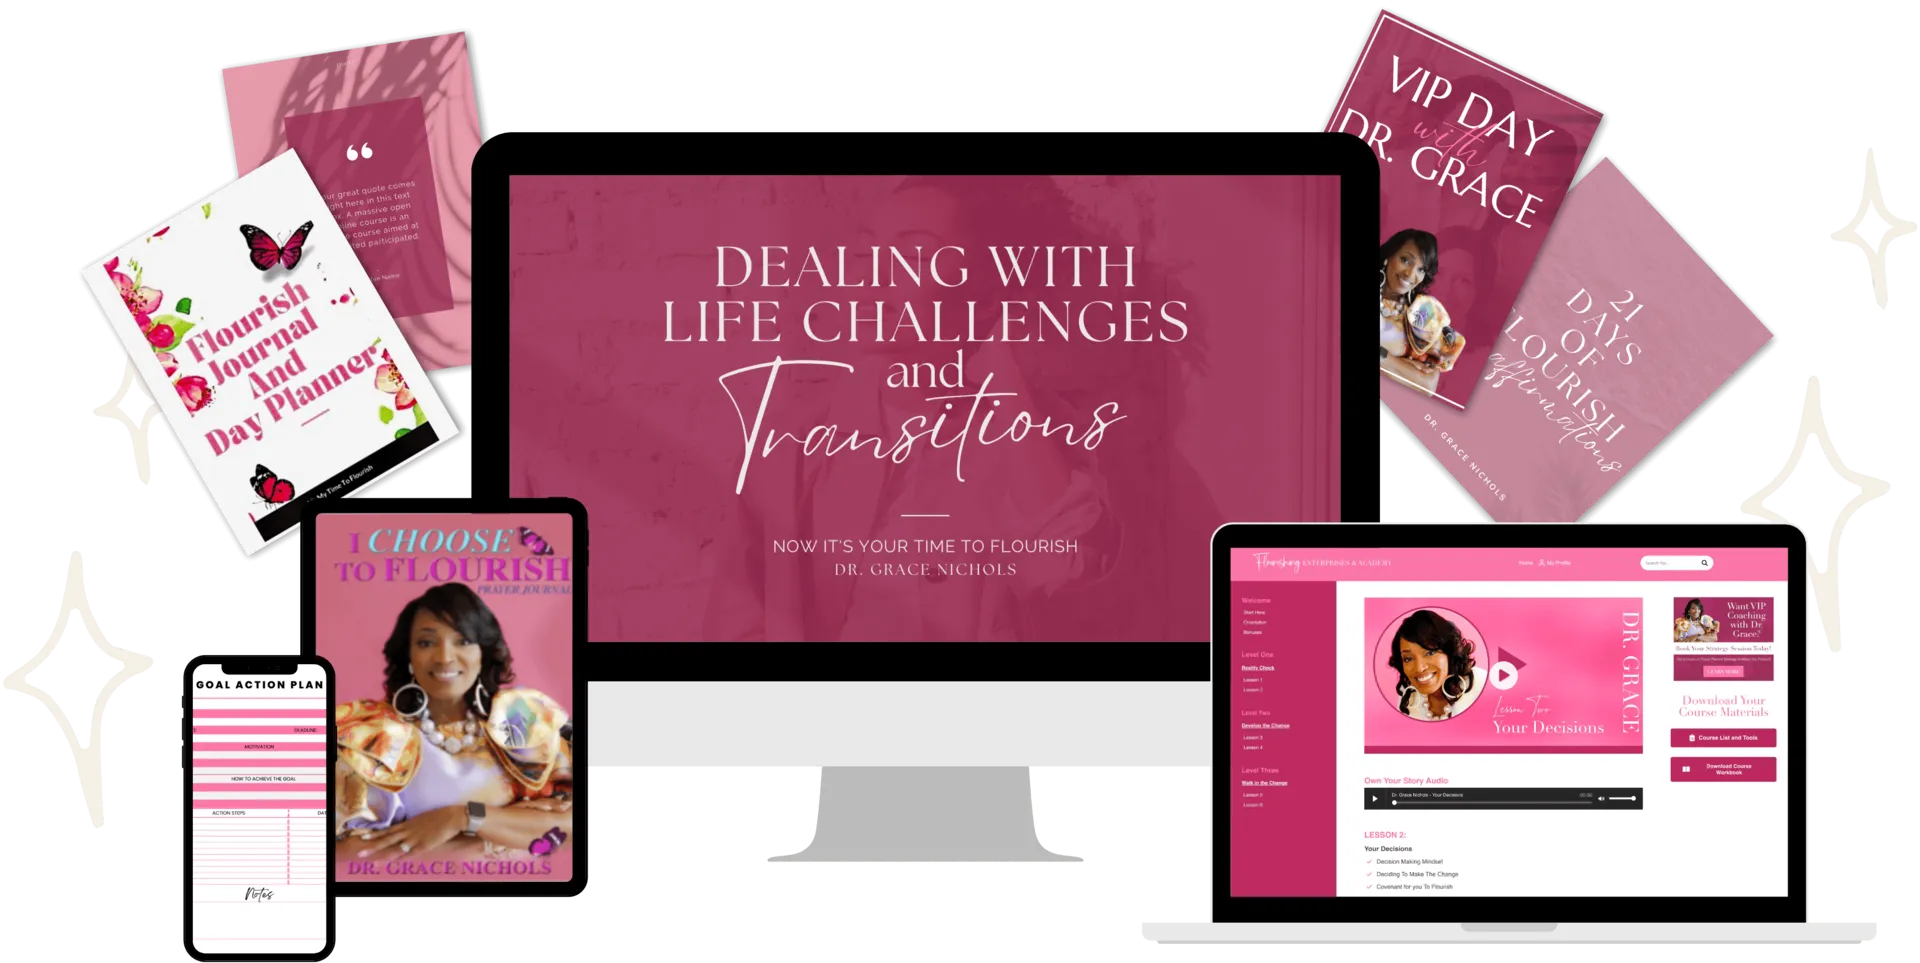 Course: Dealing With Life Challenges And Transitions